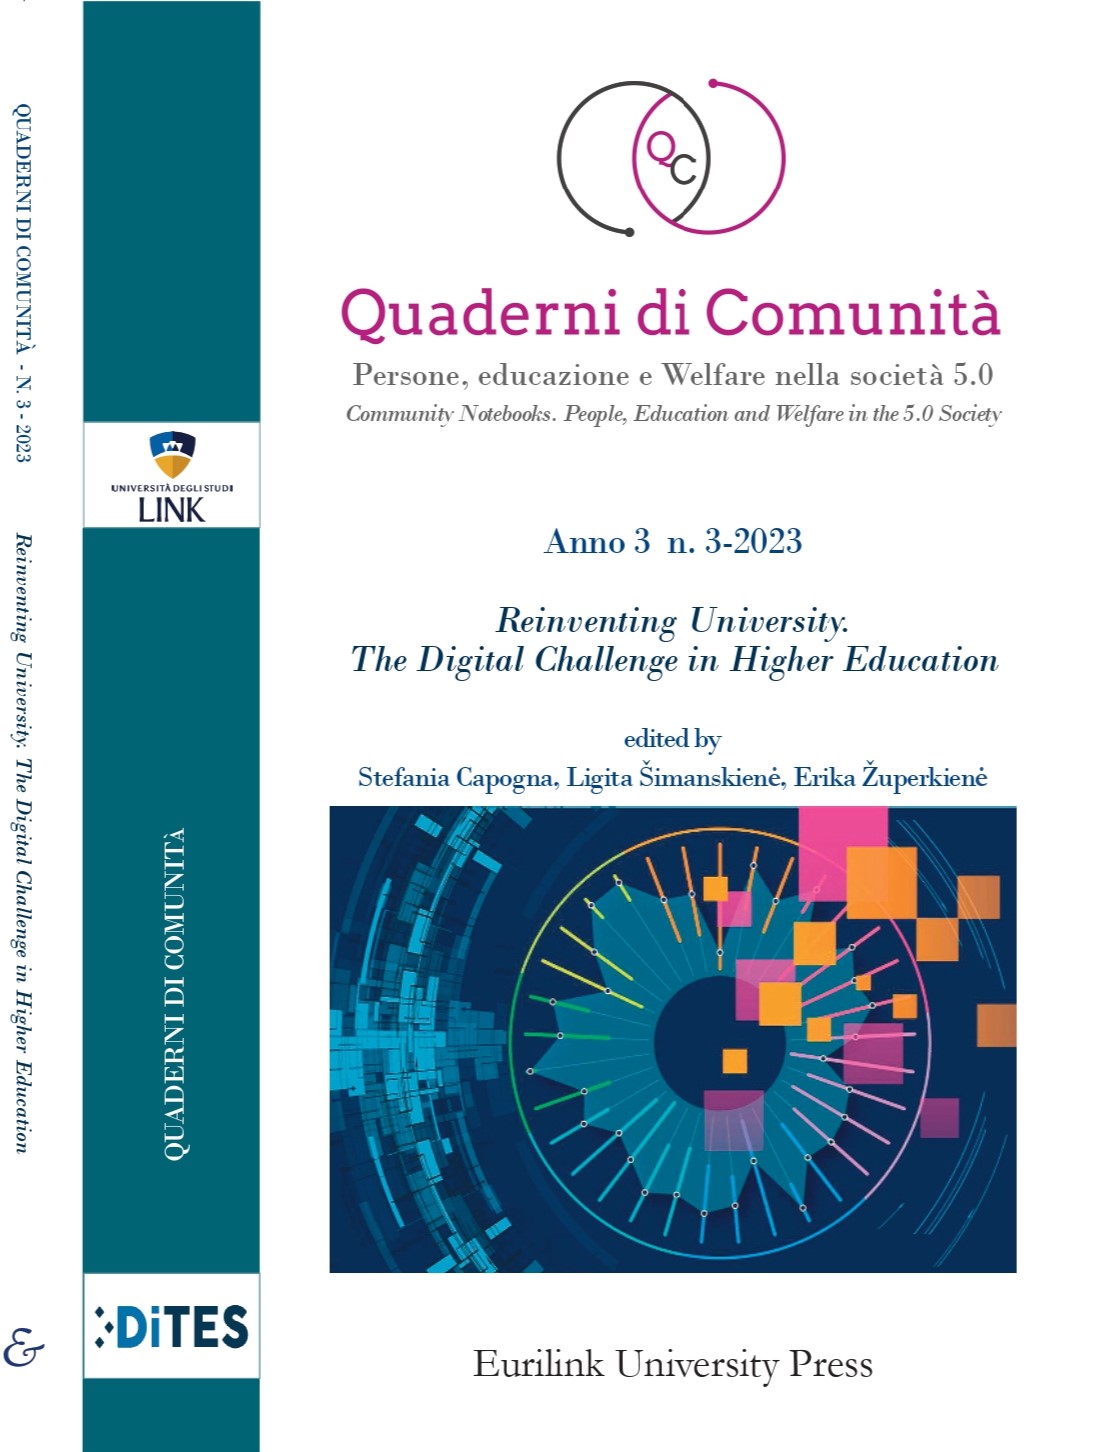 					Visualizza N. 3 (2023): Reinventing University: The Digital Challenge In Higher Education
				